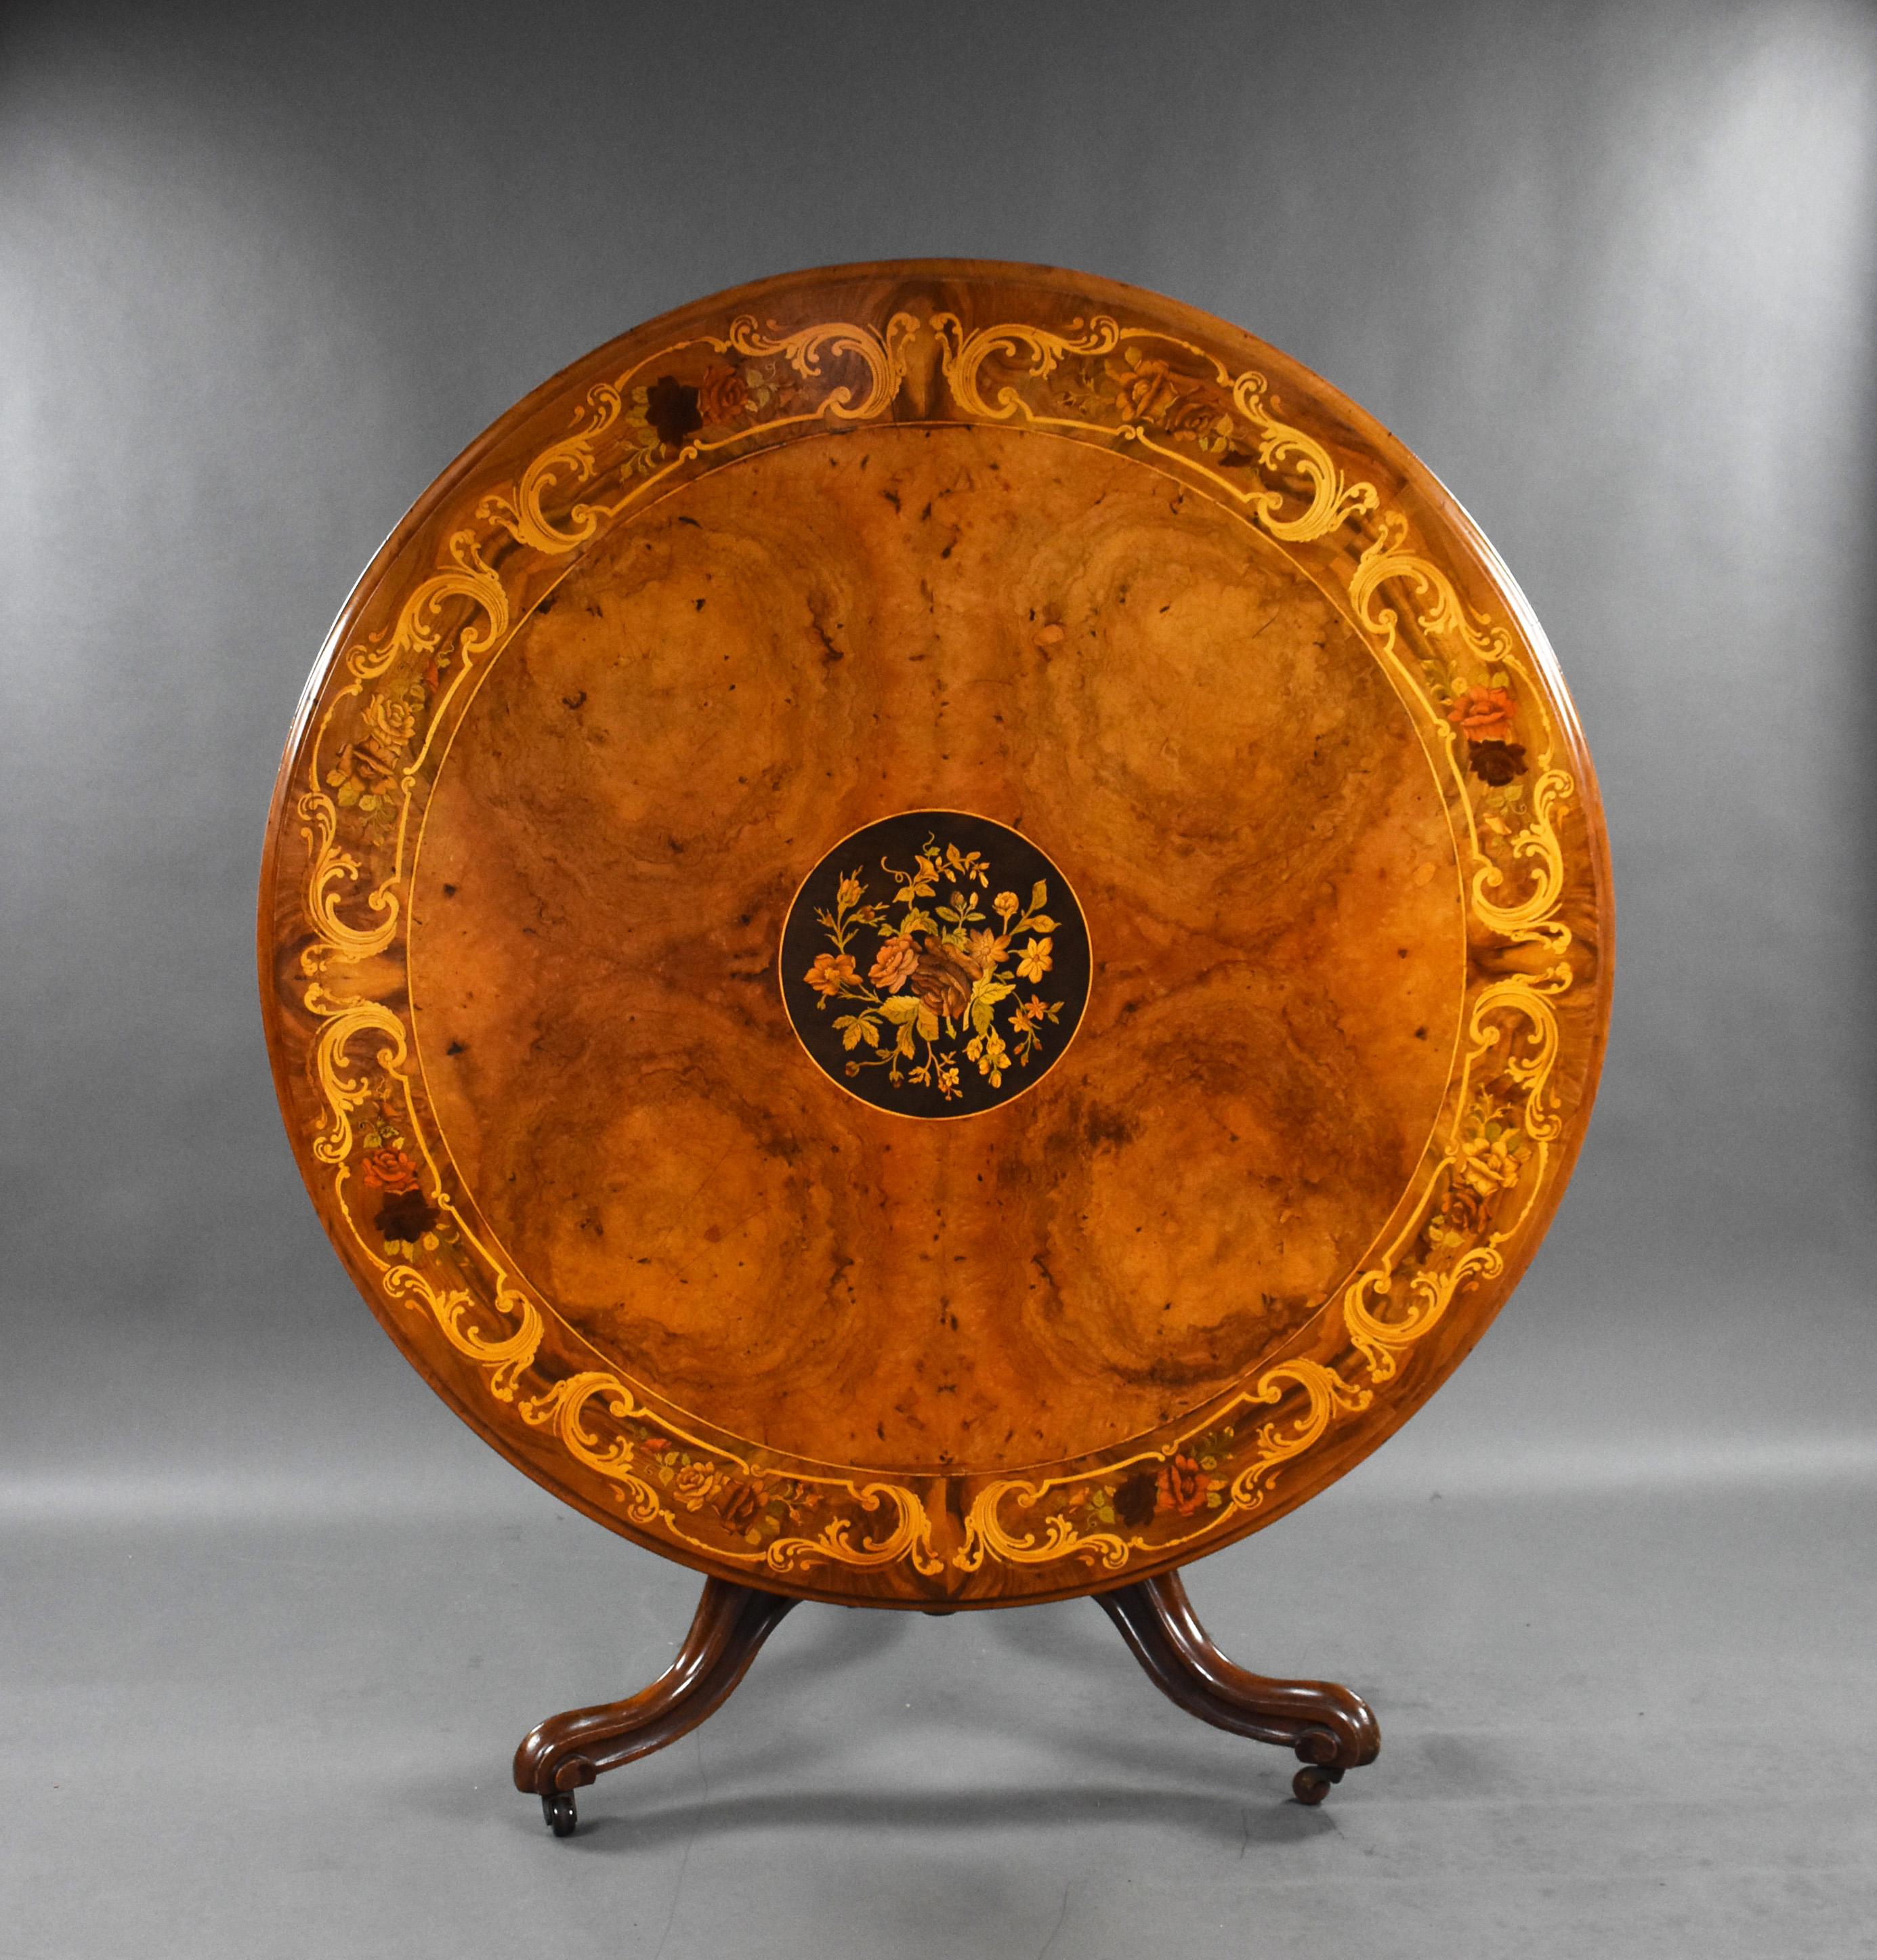 For sale is a good quality Victorian burr walnut & marquetry circular breakfast table, having a well figured and inlaid top, above a tripod base standing on elegant scroll legs raised on castors. The table is in very good condition for its age.